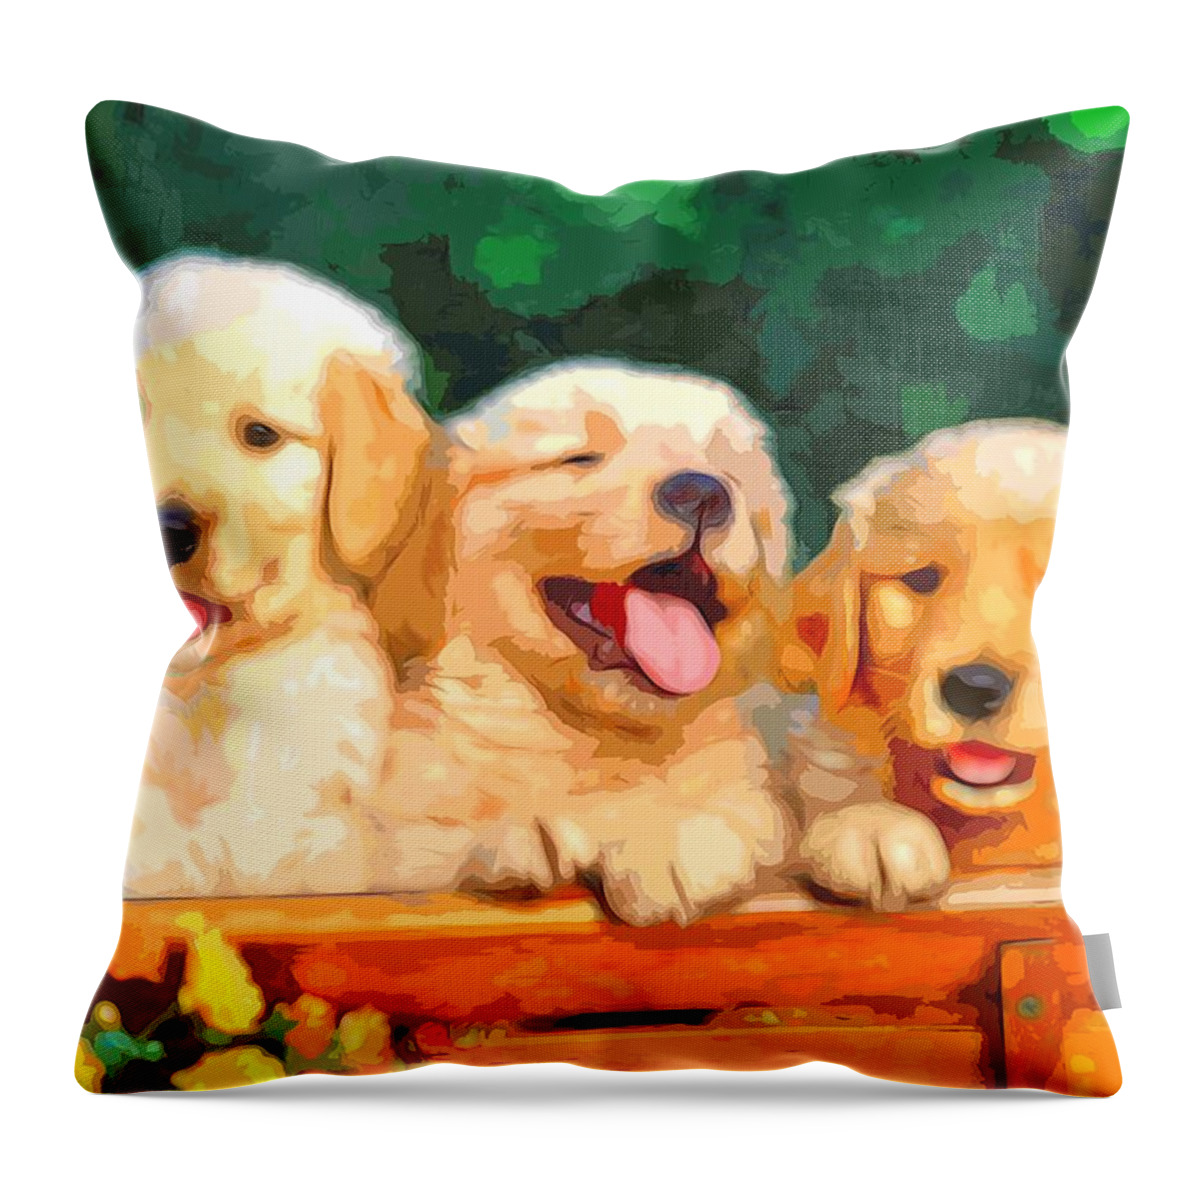 Happy Puppies Throw Pillow featuring the digital art Happy Puppies by Maciek Froncisz